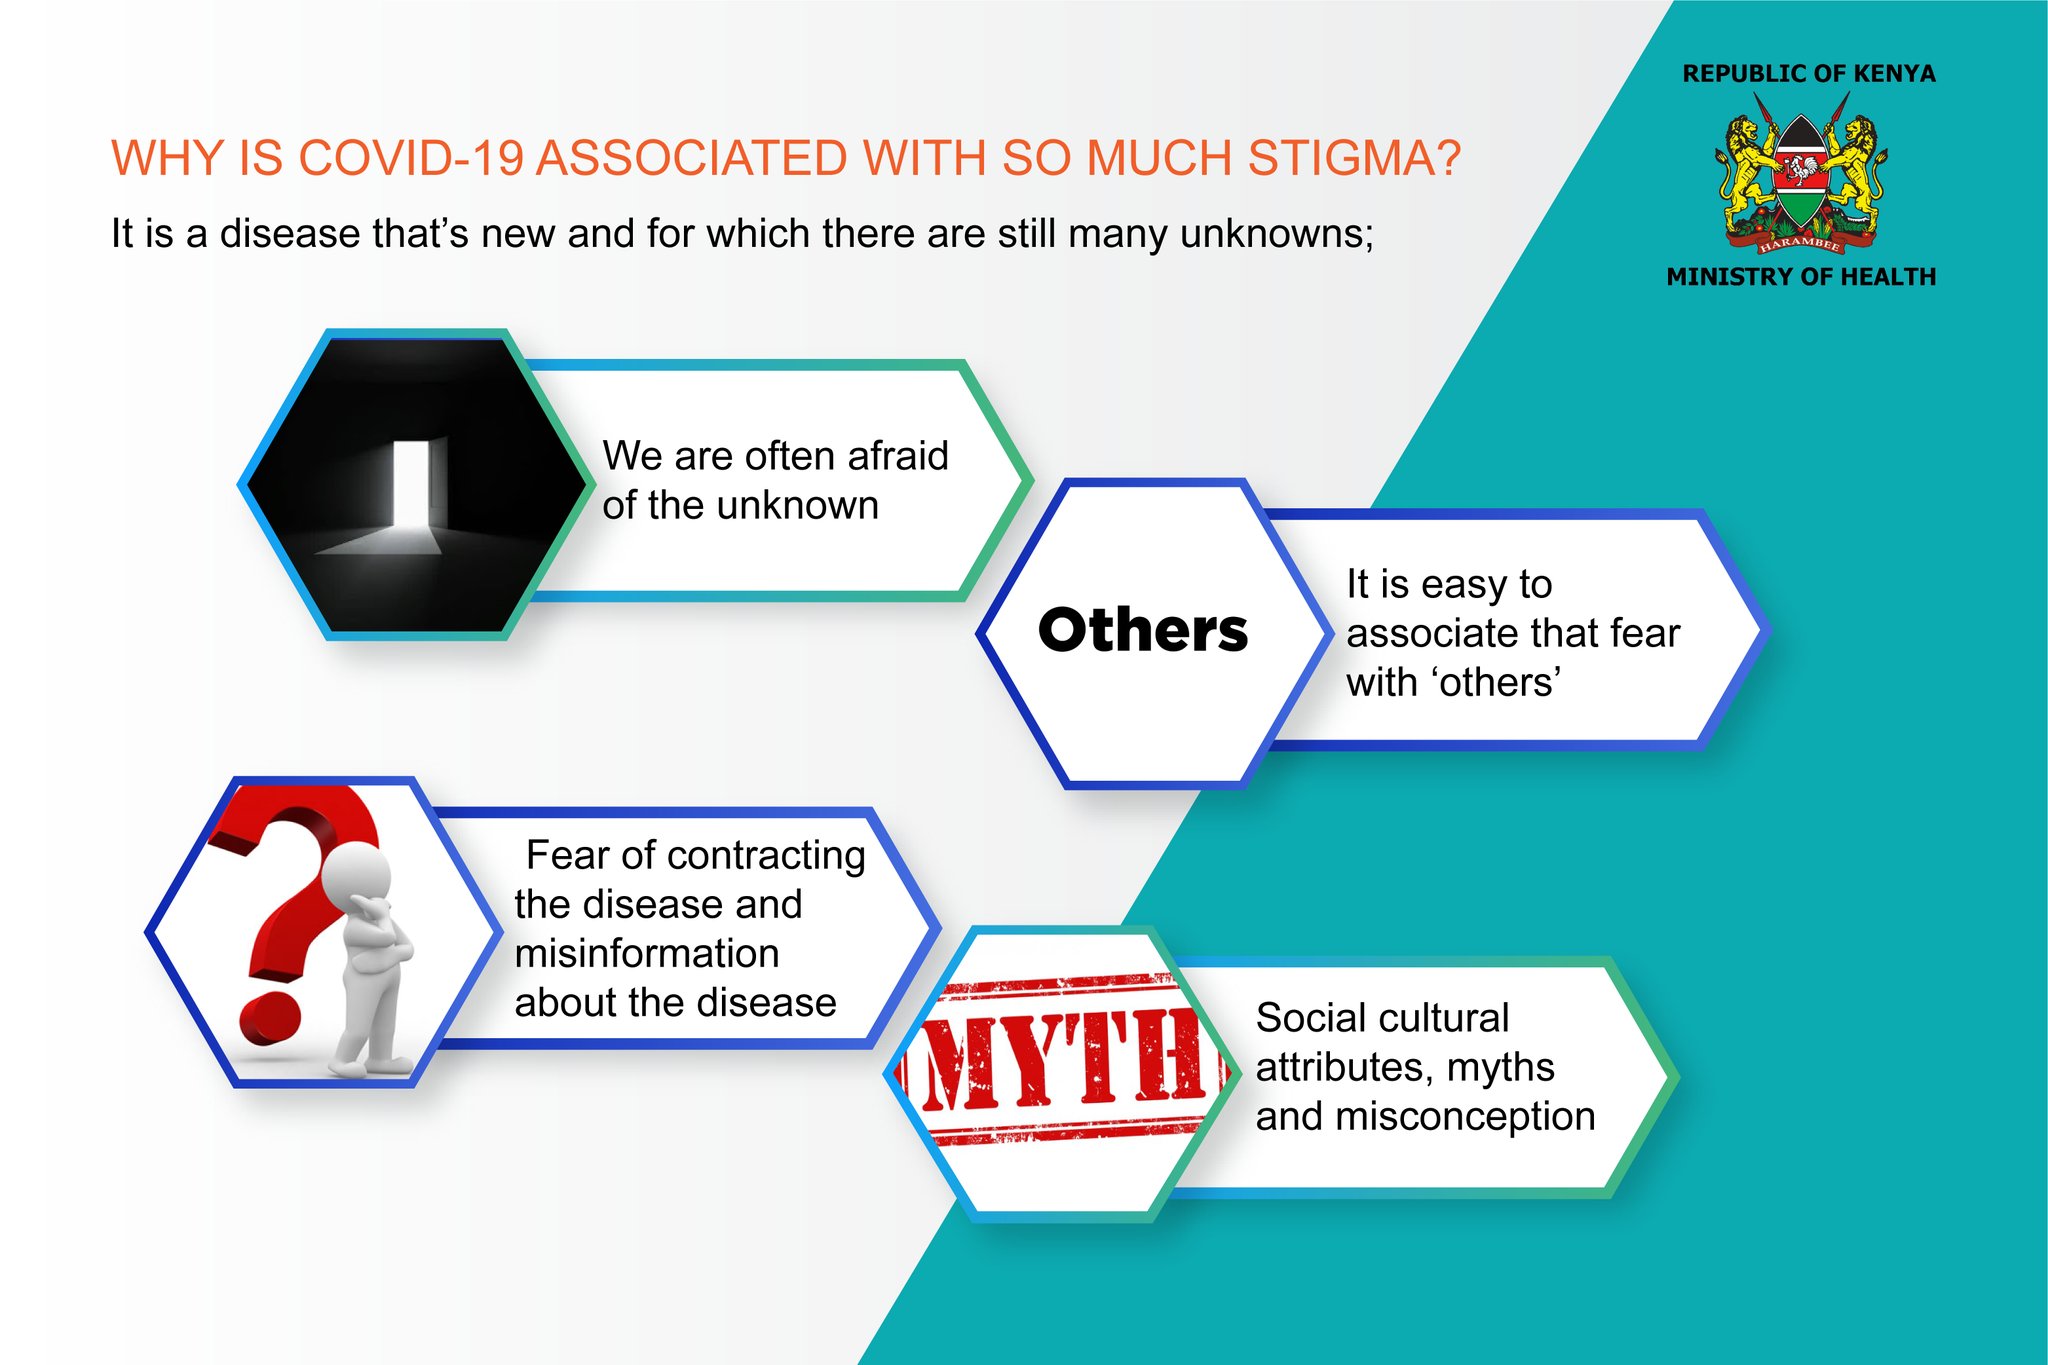 Why is COVID-19 associated with so much Stigma